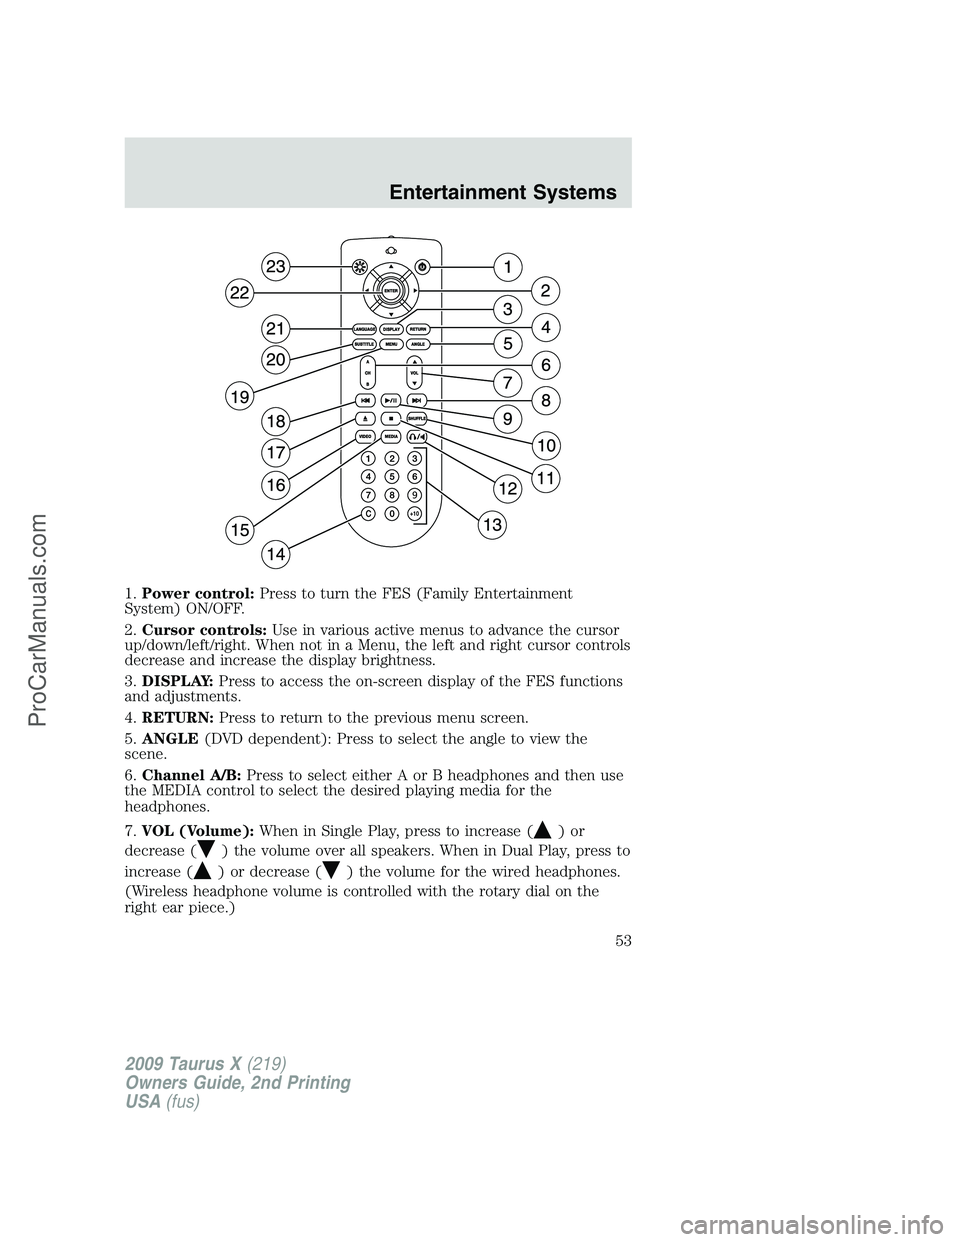 FORD FREESTYLE 2009 Workshop Manual 1.Power control:Press to turn the FES (Family Entertainment
System) ON/OFF.
2.Cursor controls:Use in various active menus to advance the cursor
up/down/left/right. When not in a Menu, the left and rig